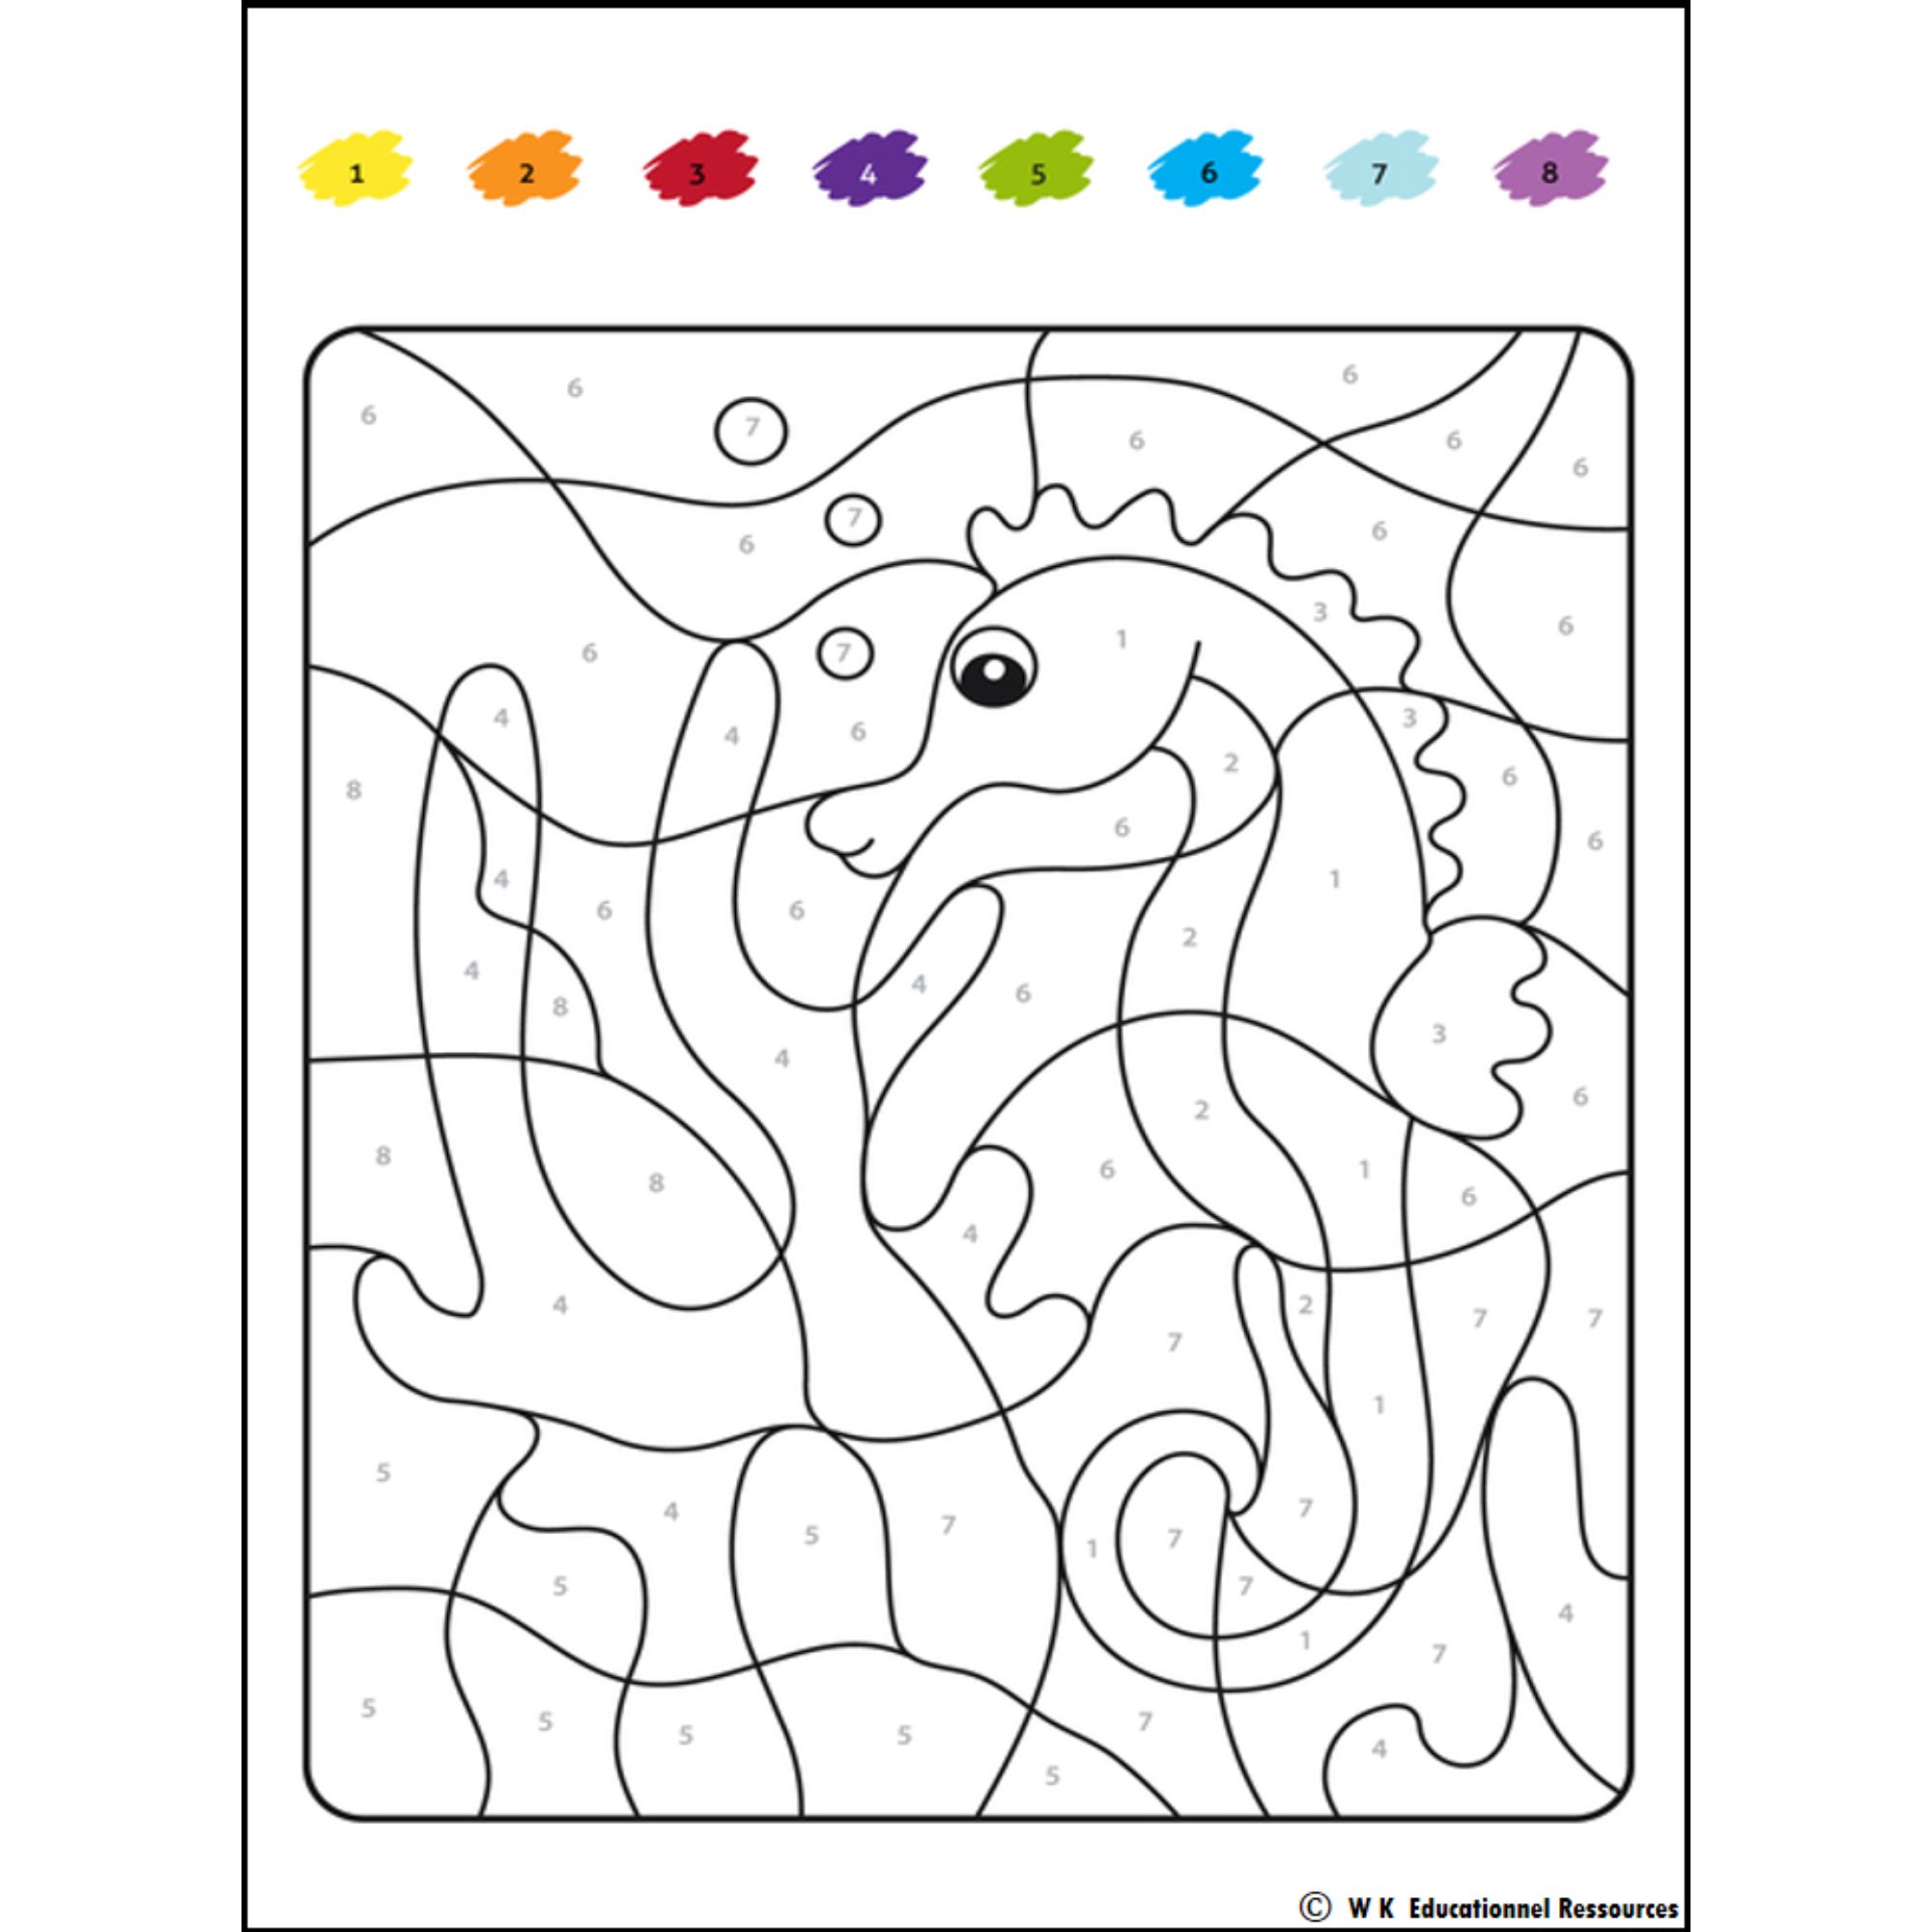 Summer color by code numbers coloring page end of year activities summer review made by teachers